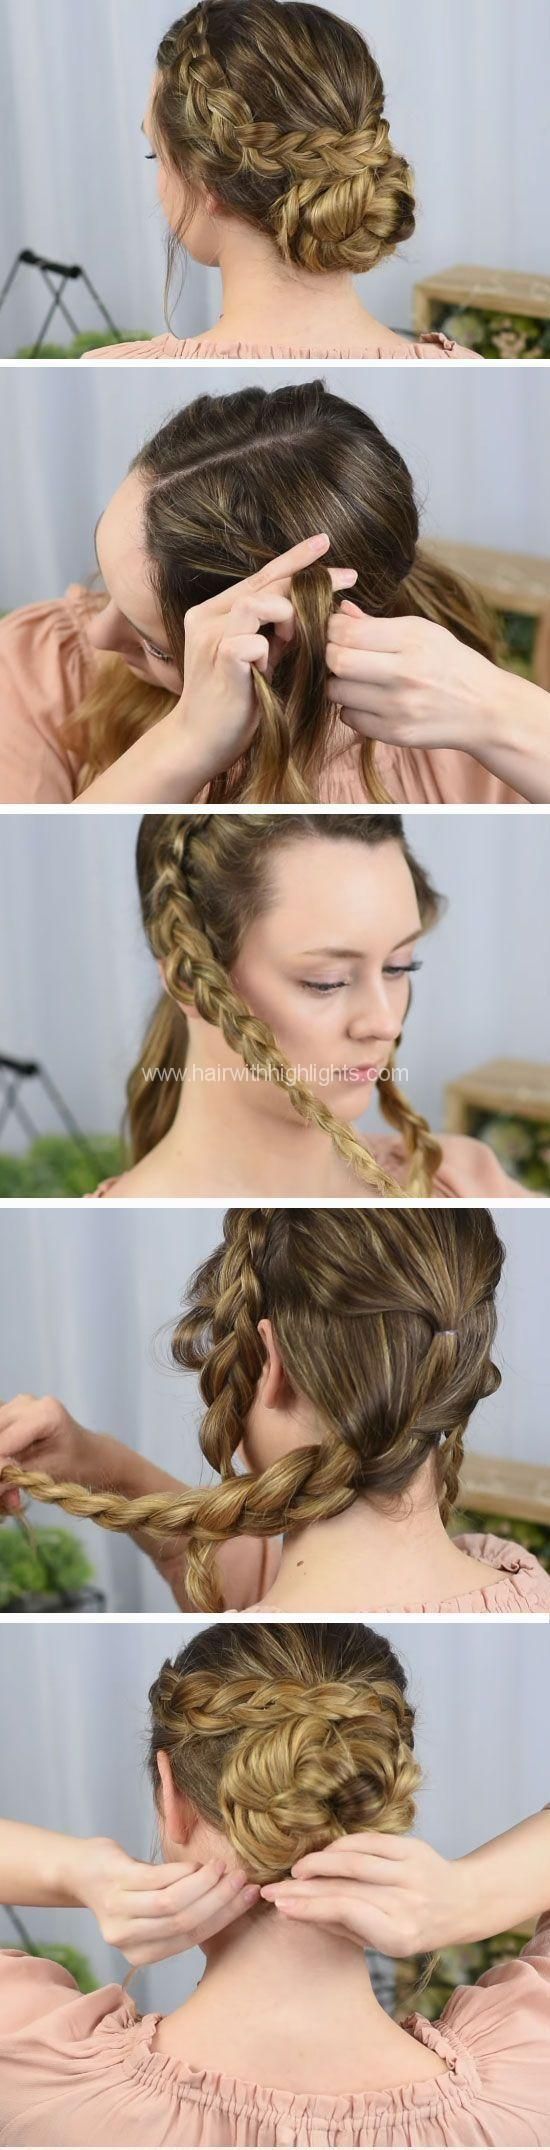 Dutch braided up-do | Fast DIY Prom Hairstyles for Medium H  #styles #braided #medical #netherlands - Site Today